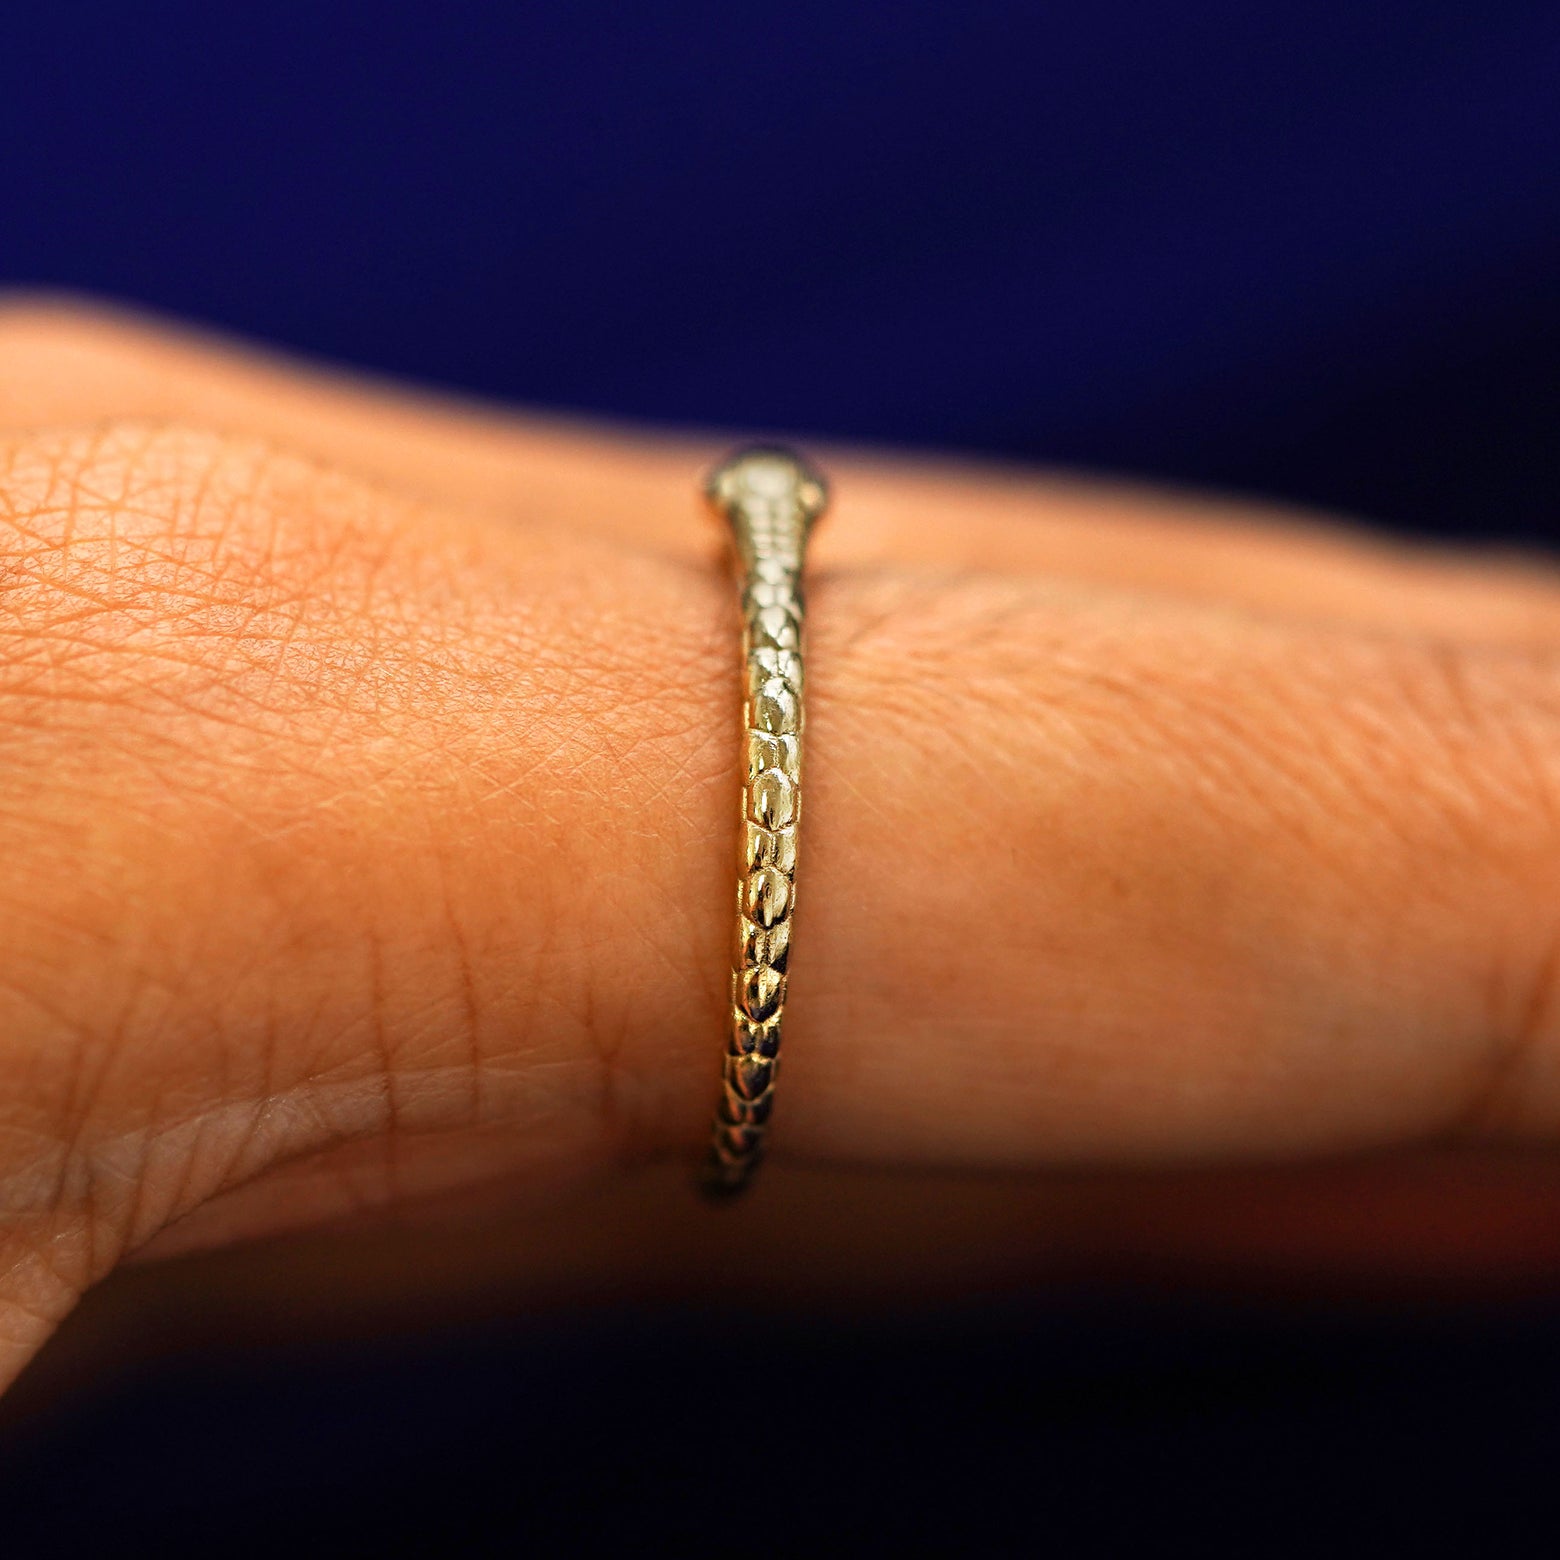 Alternate Side view of a Gemstone Ouroboros Snake Ring on a model's finger showing the back of the snake's head